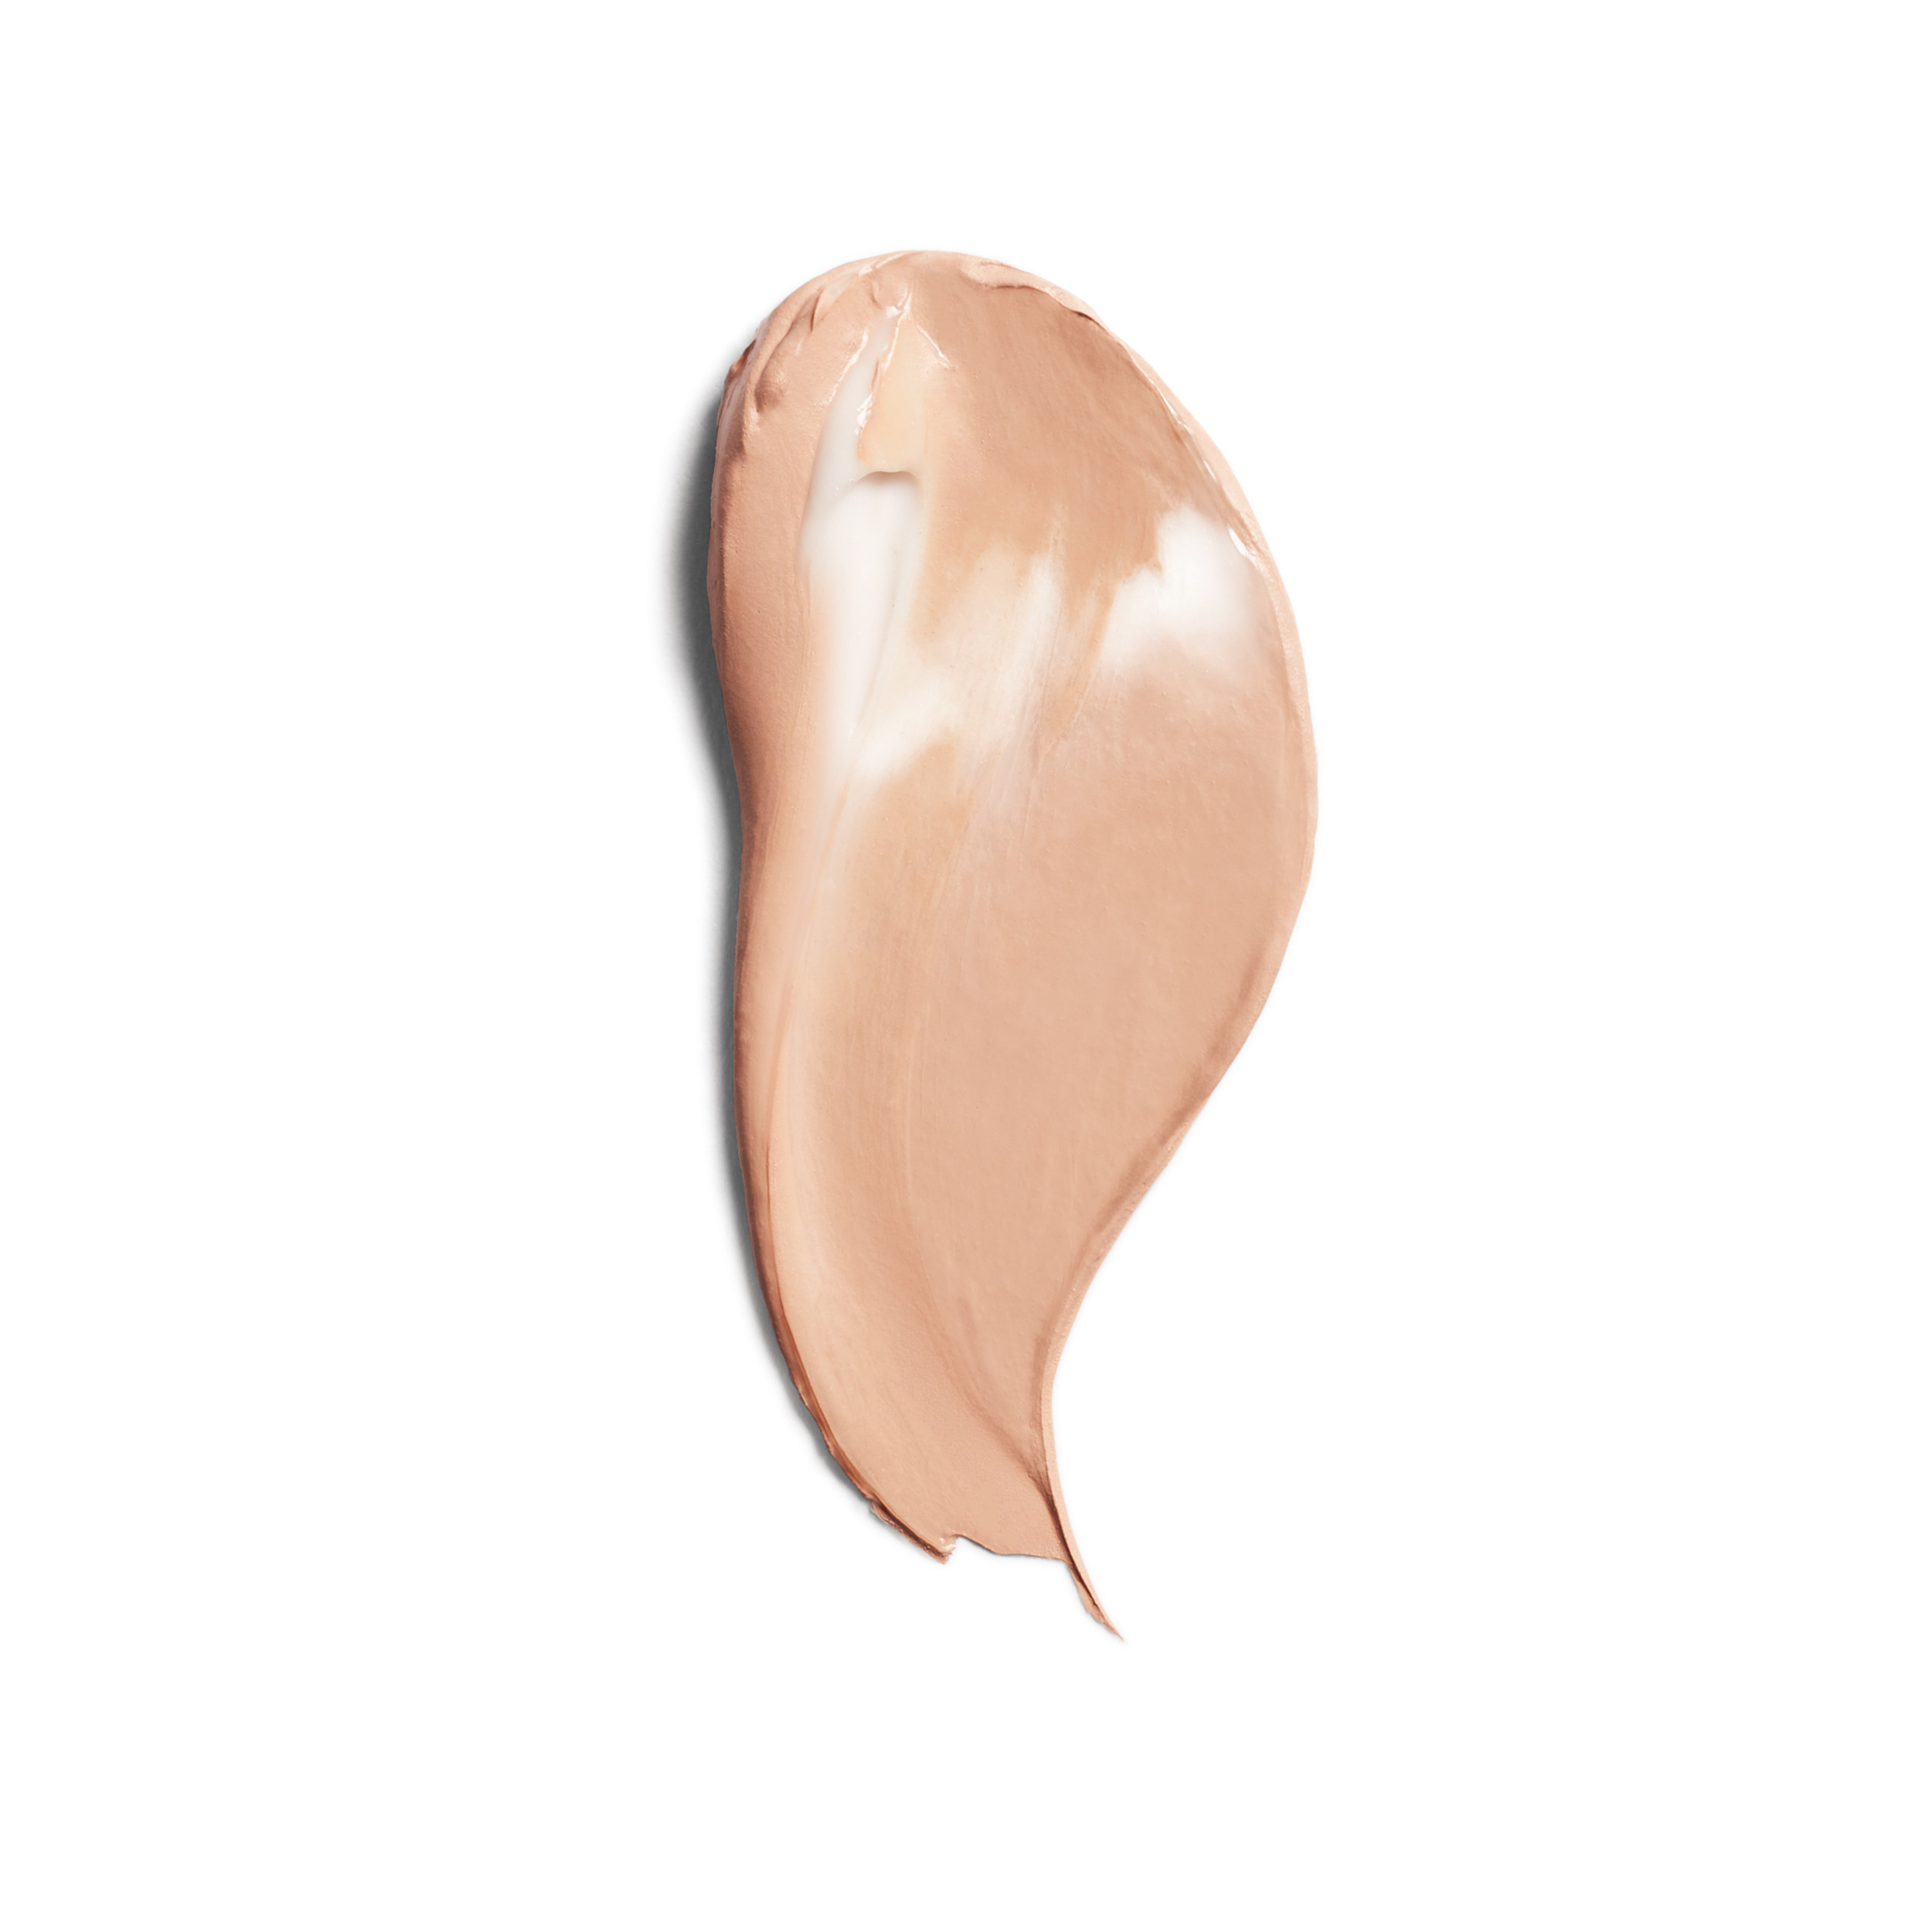 COVERGIRL + OLAY Simply Ageless Instant Wrinkle-Defying Foundation with SPF 28, Medium Light, 0.44 oz - image 3 of 9